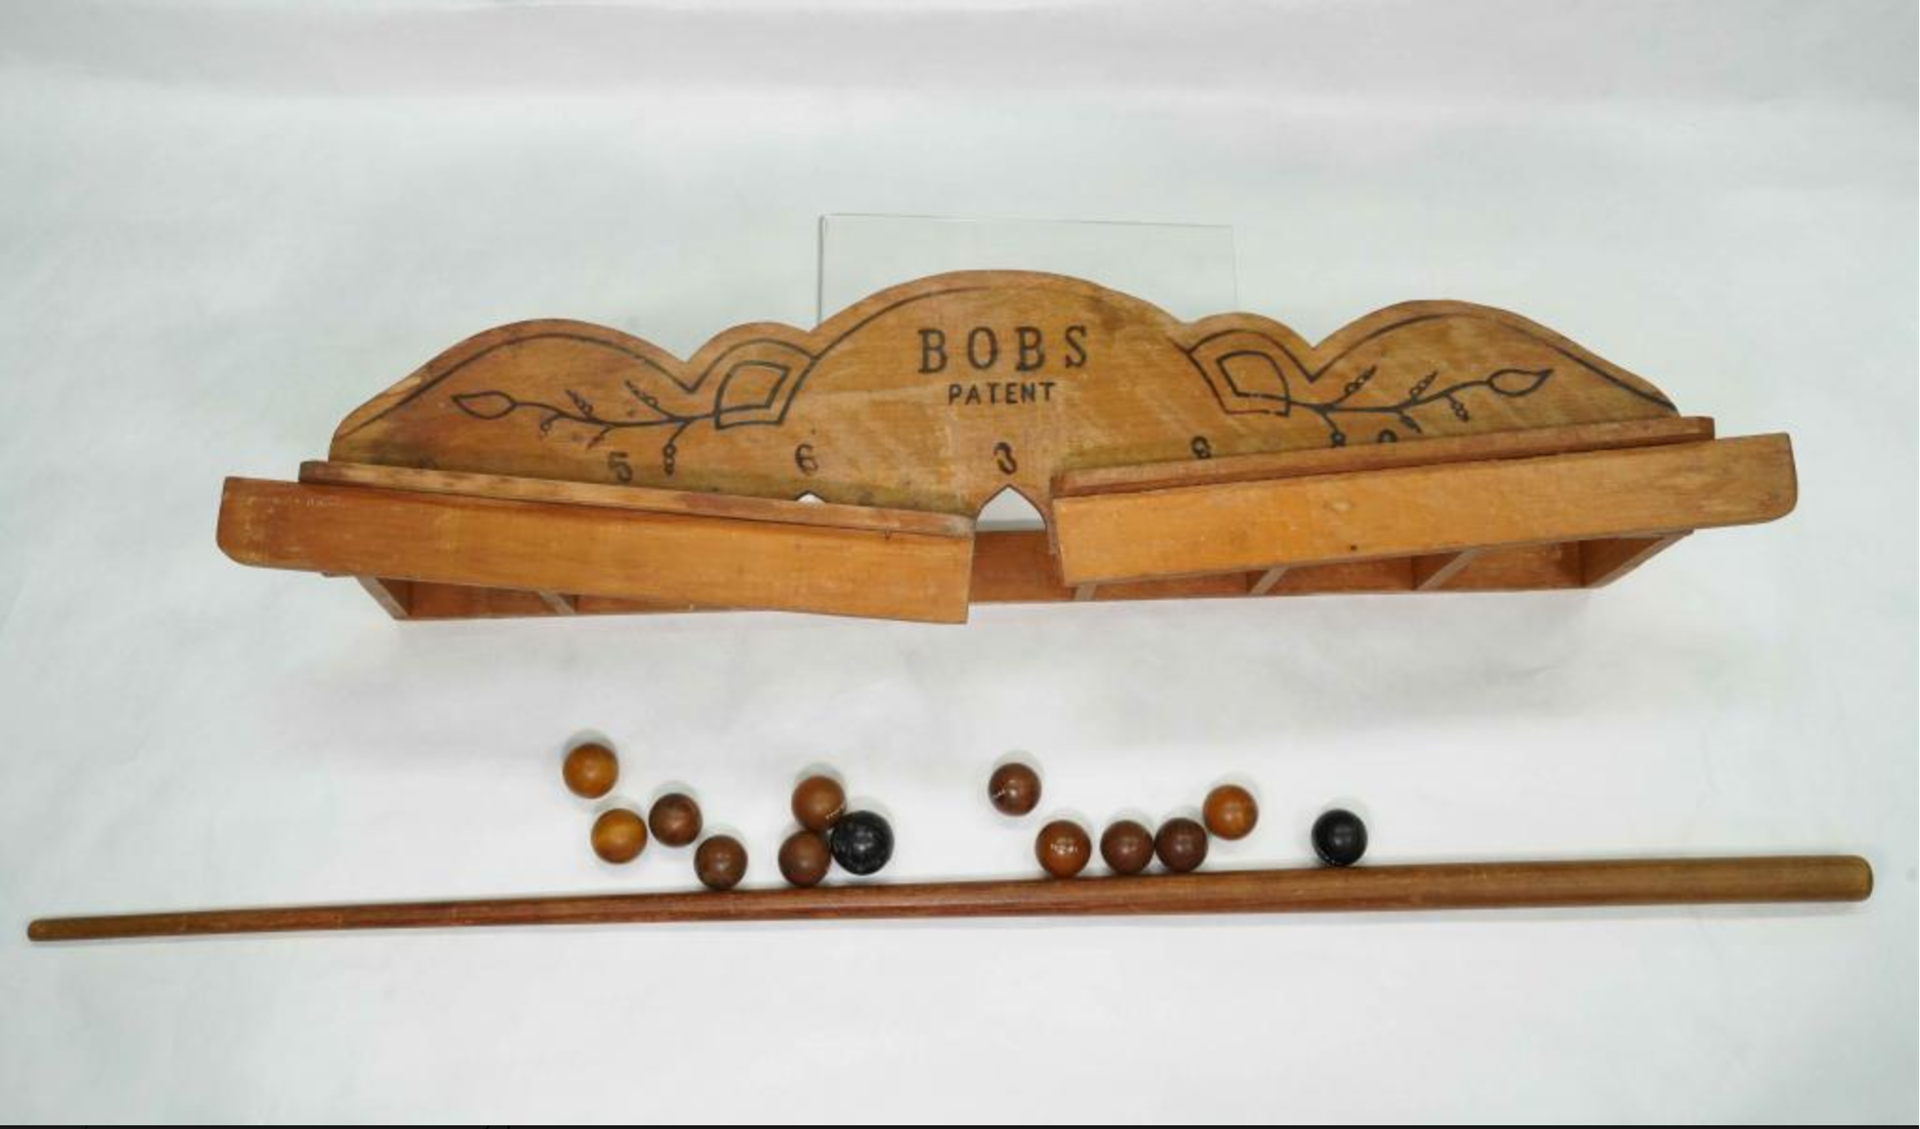 Wooden tabletop game called Bobs set consisting of balls and a cue